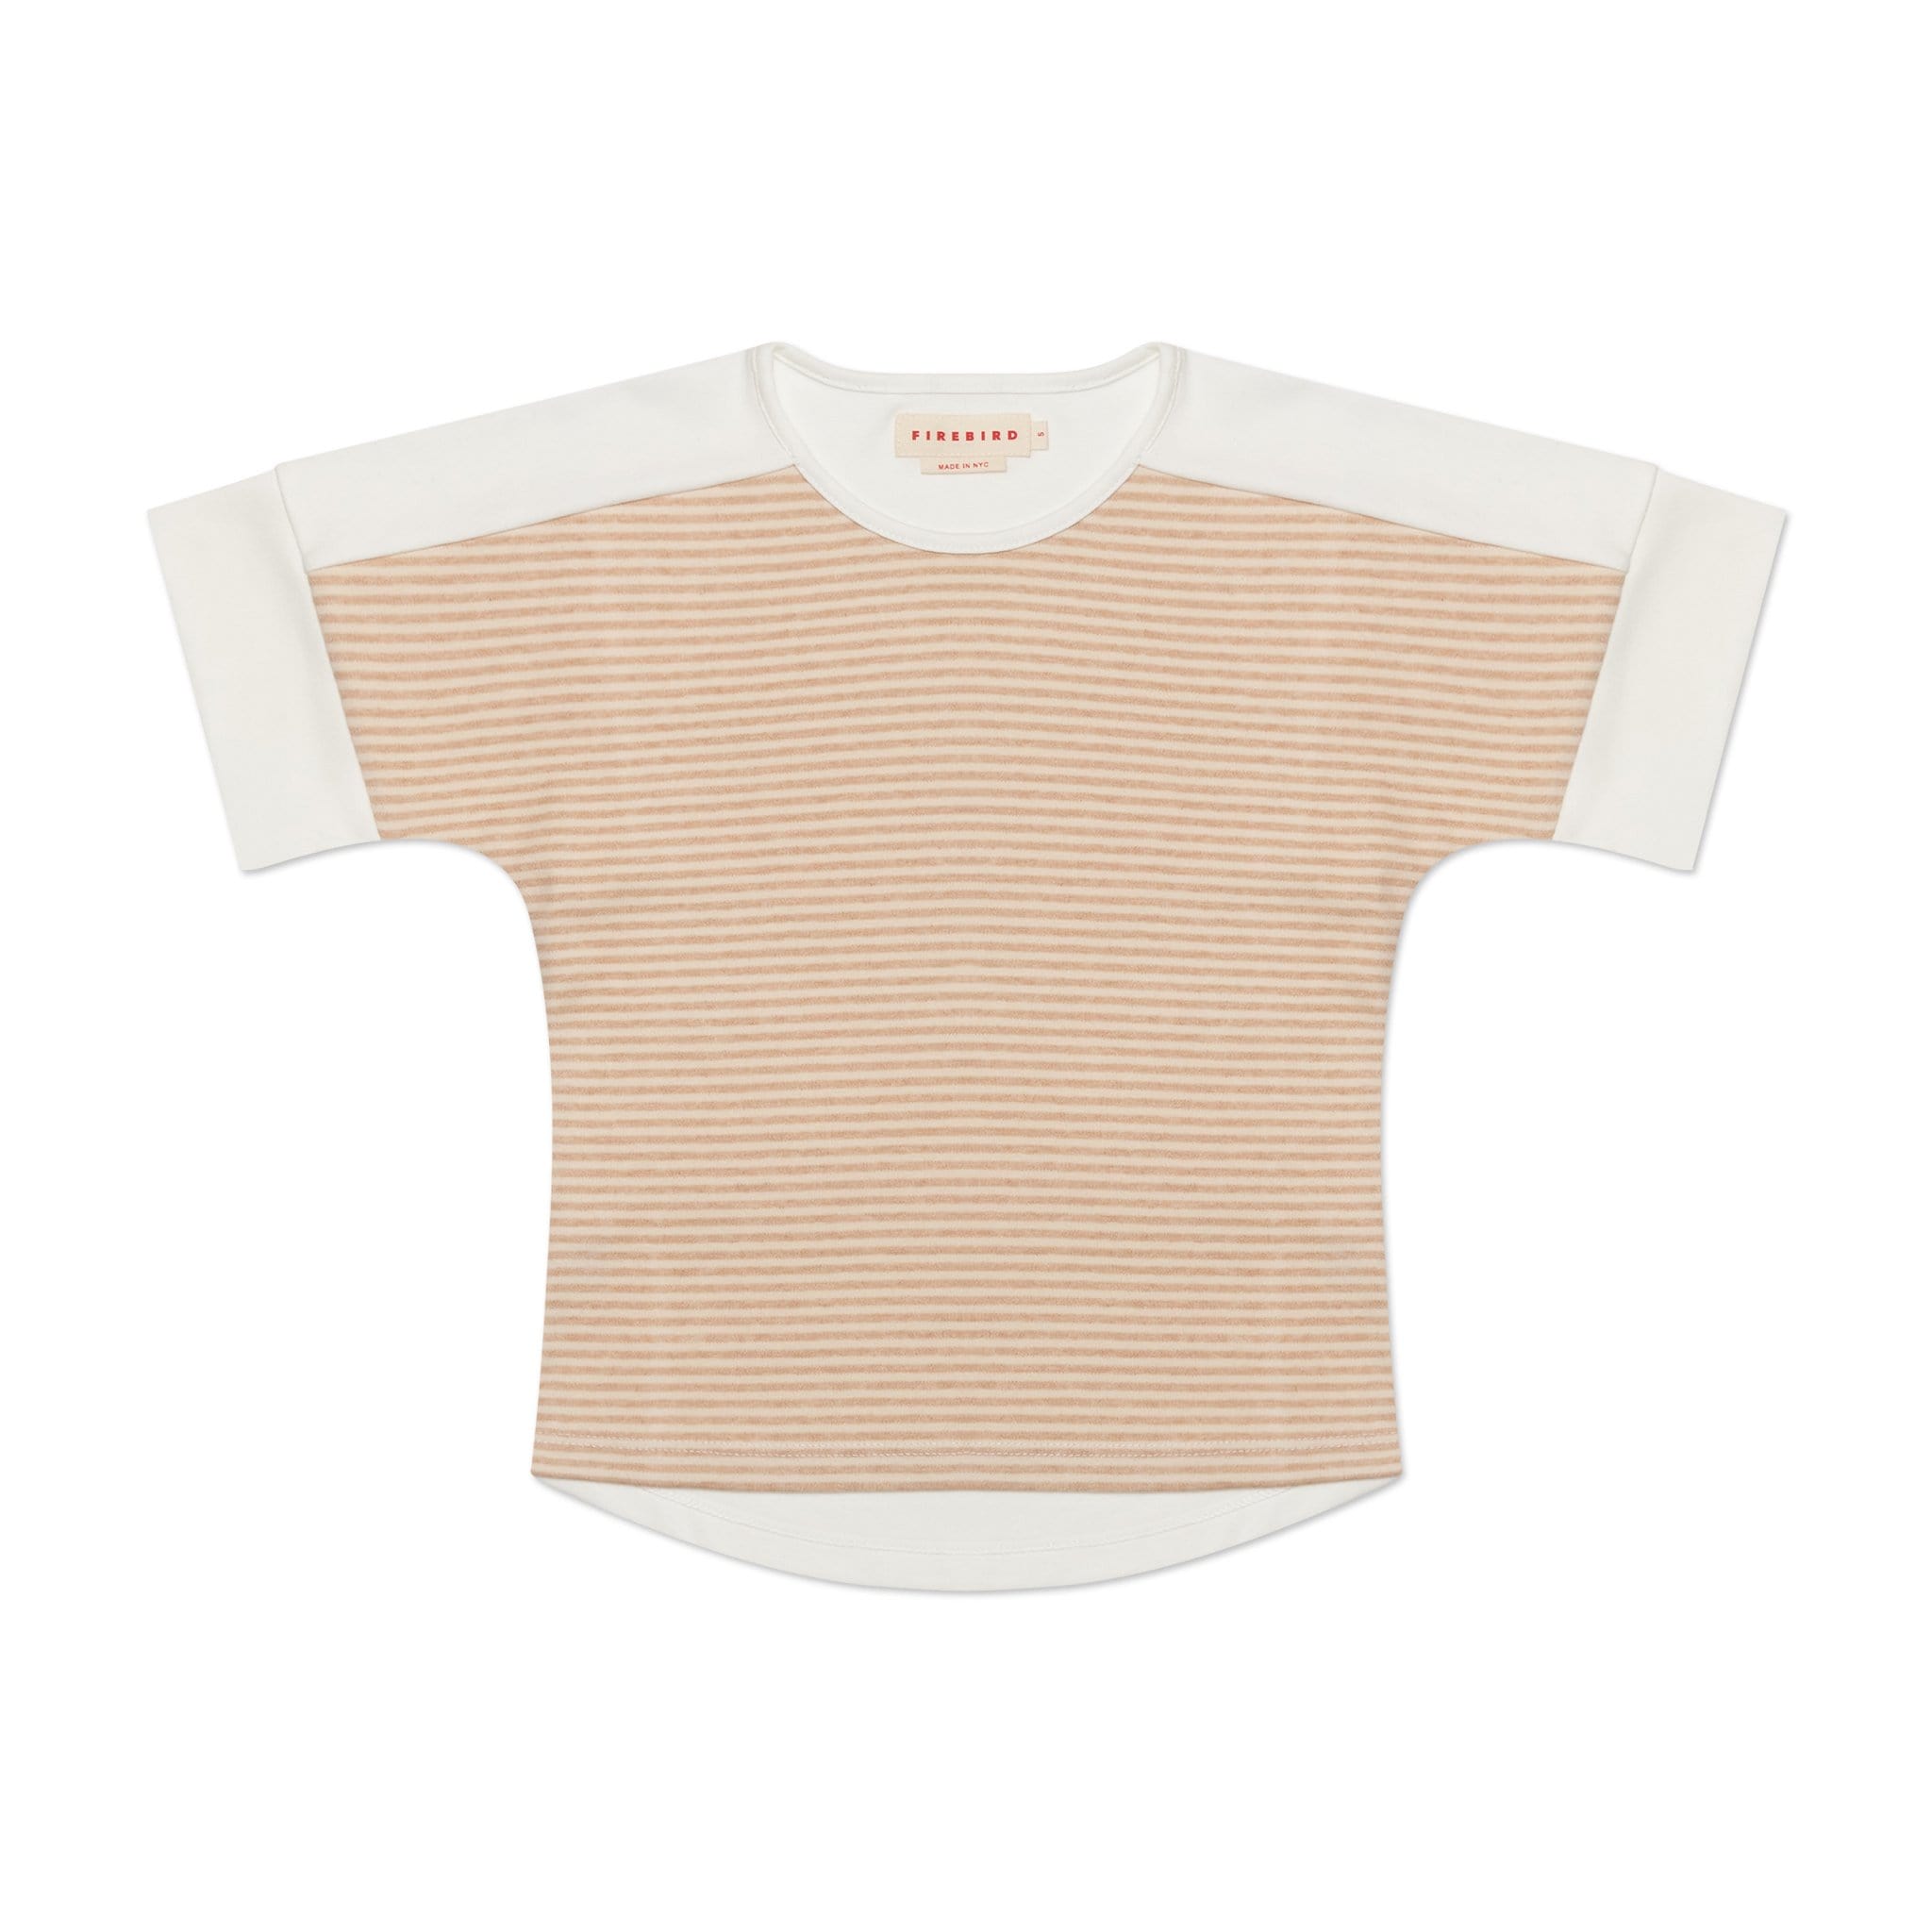 Girls organic cotton tee that is durable, sustainable, and eco-friendly. Natural beige stripes. 